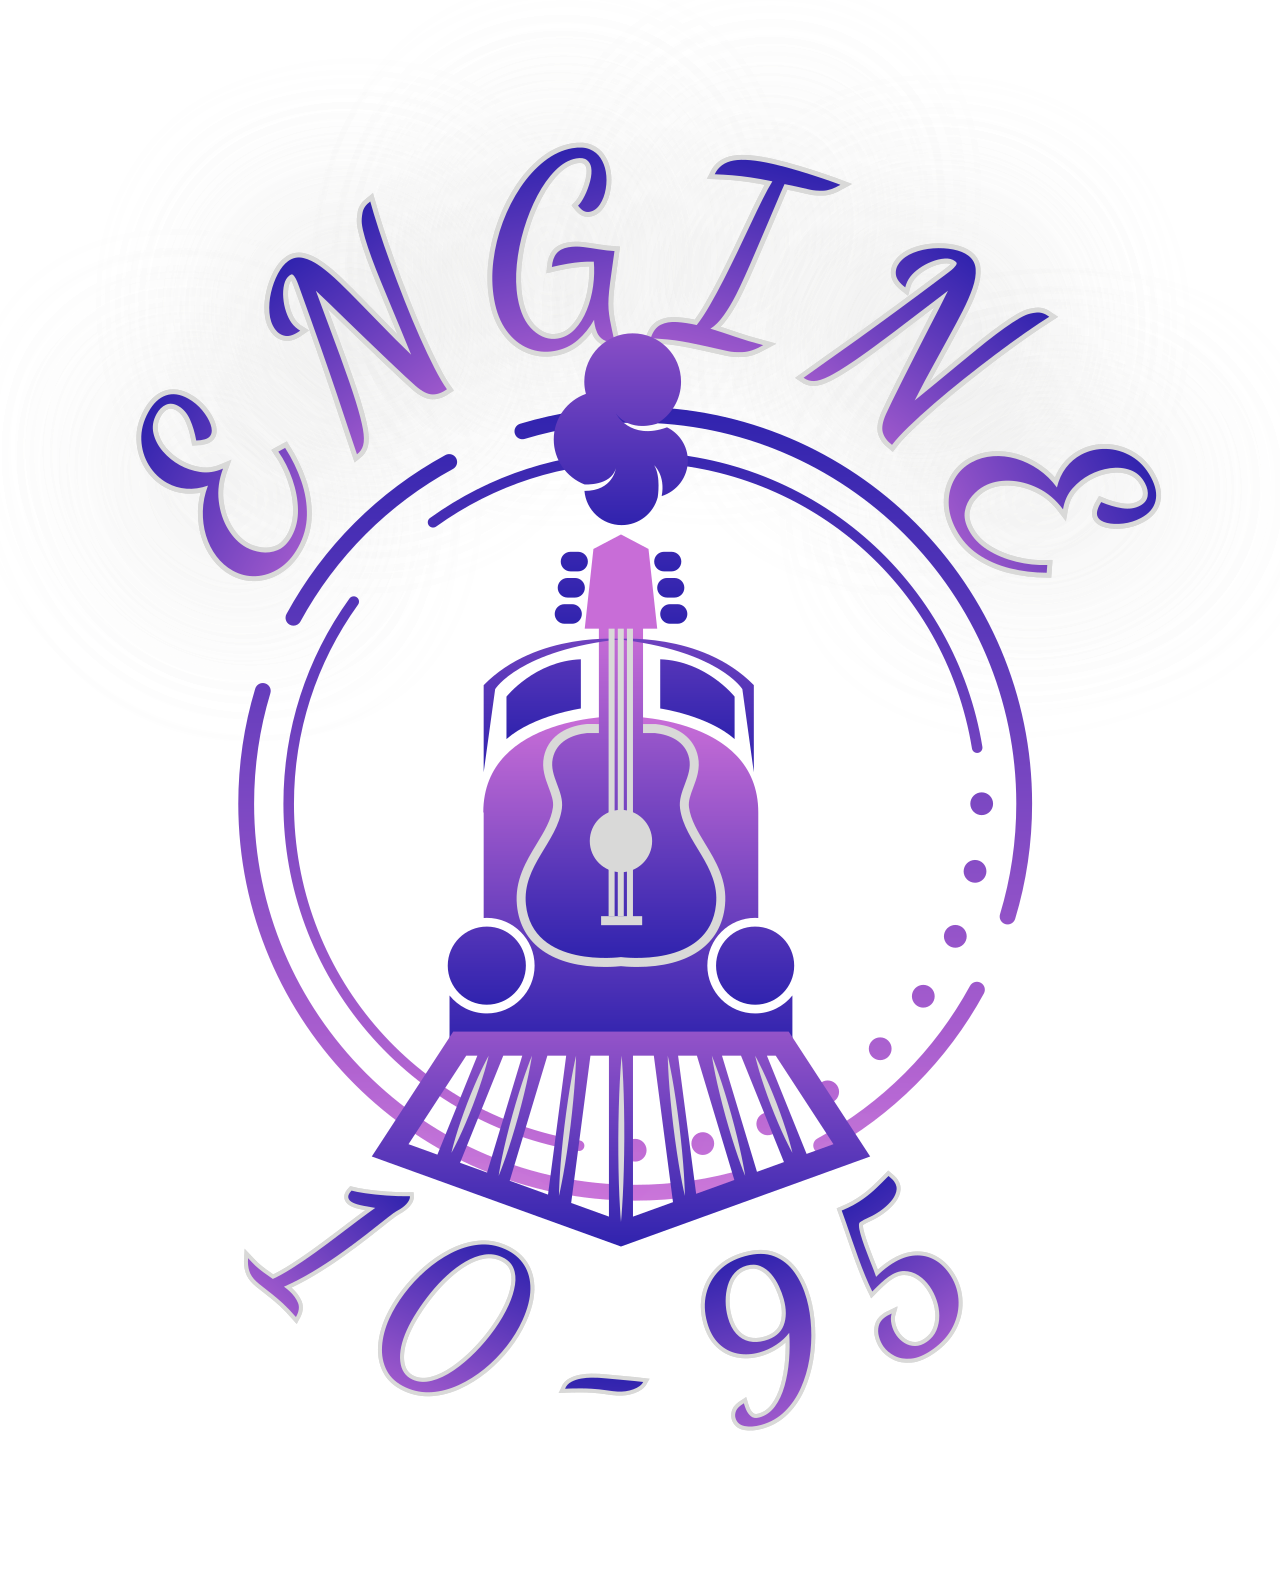 Kingston's premier Blues Rock Band, Engine 10-95 (Engine 1095) will perform weddings, parties, bars, outdoor events.